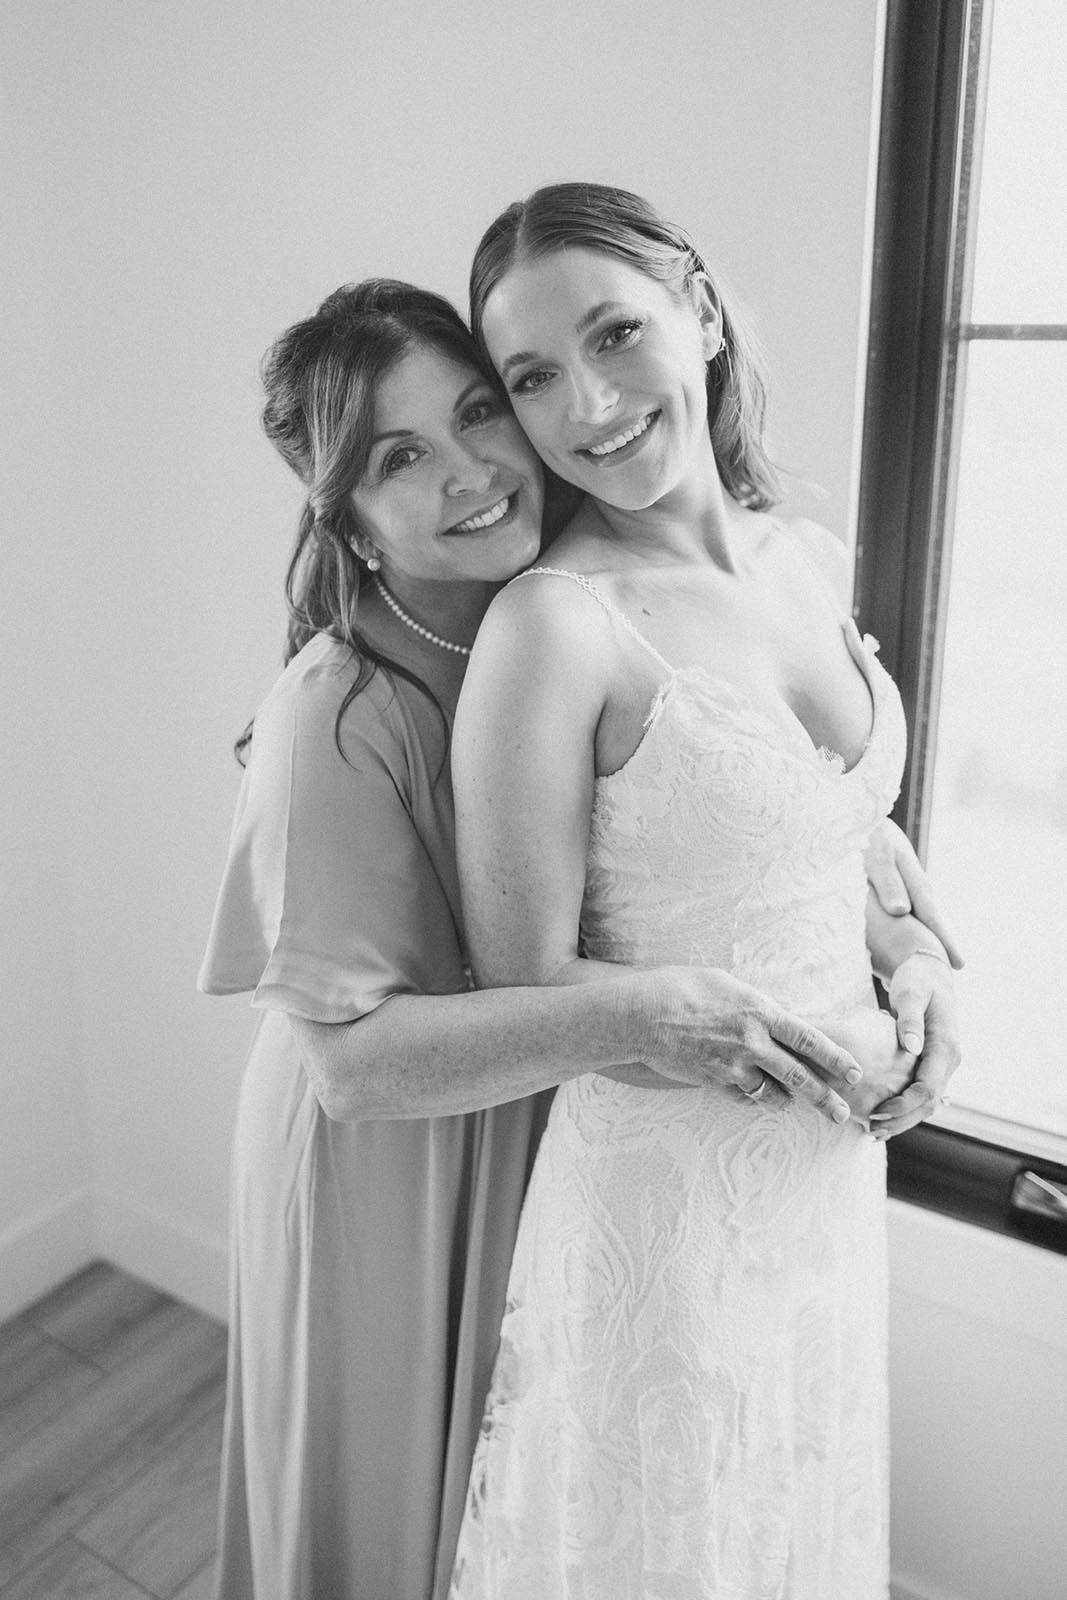 Bride, alongside her mother who caresses her baby bump